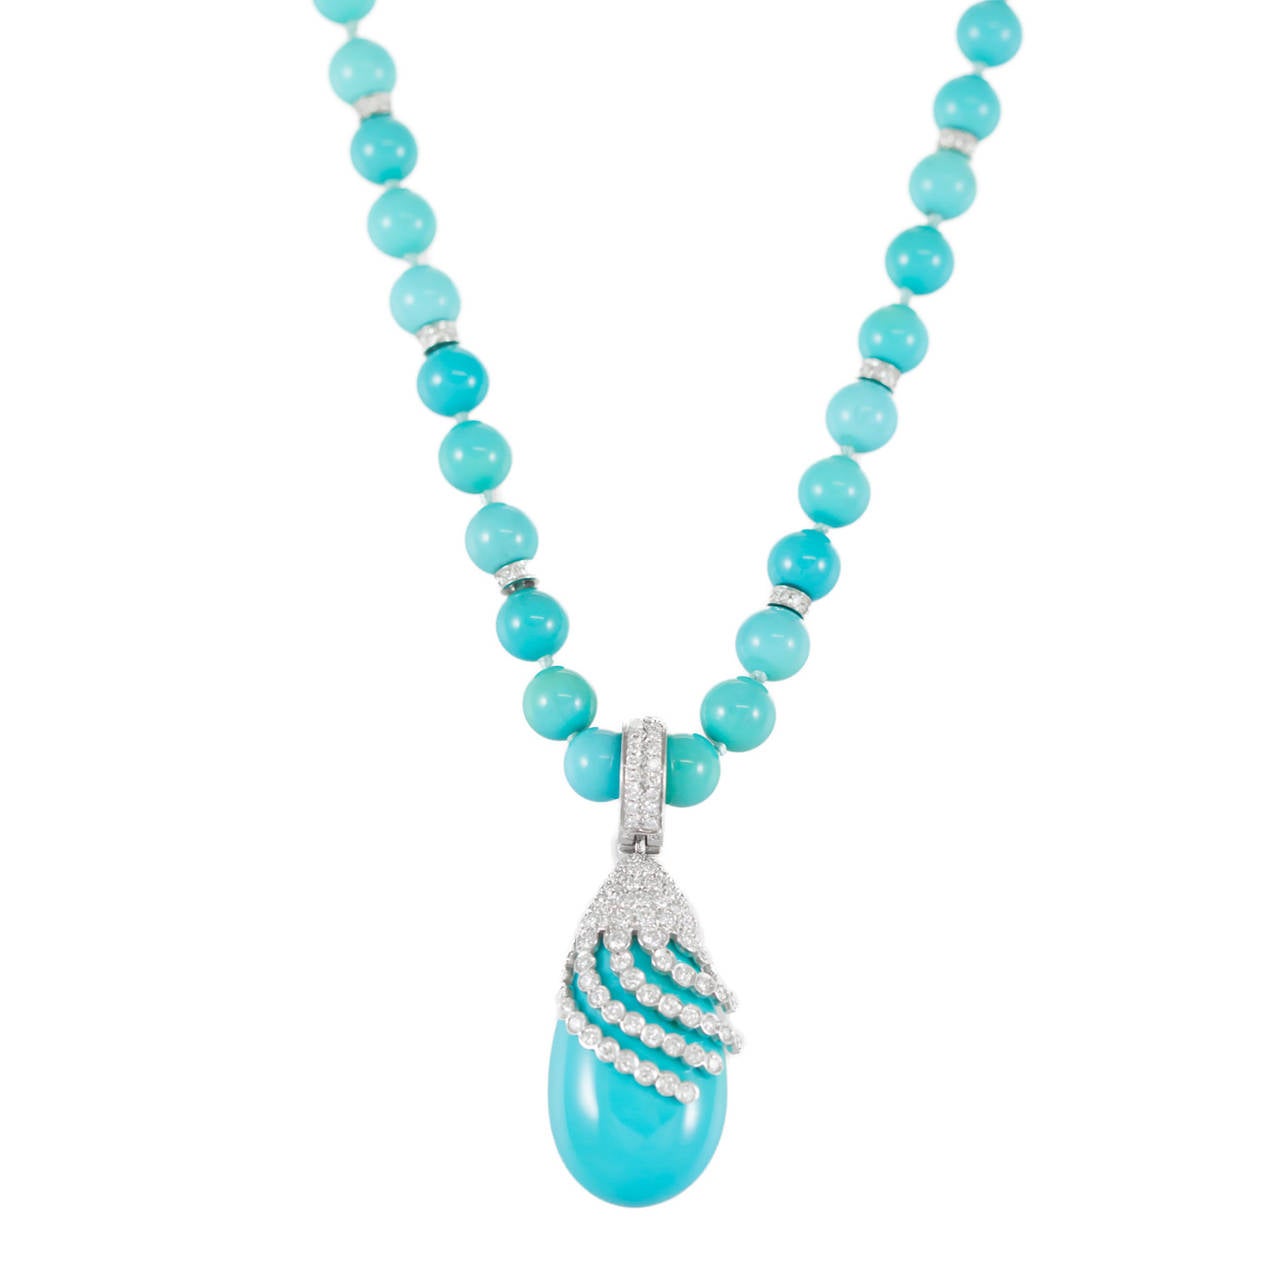 Lady's single strand fully knotted Spherical Bead Turquoise necklace with six white gold rondelles, bead-set with eight (8) Round Brilliant cut Diamonds in each, 14K white gold (stamped) hook clasp and a 14K white gold (stamped) enhancer, post-set